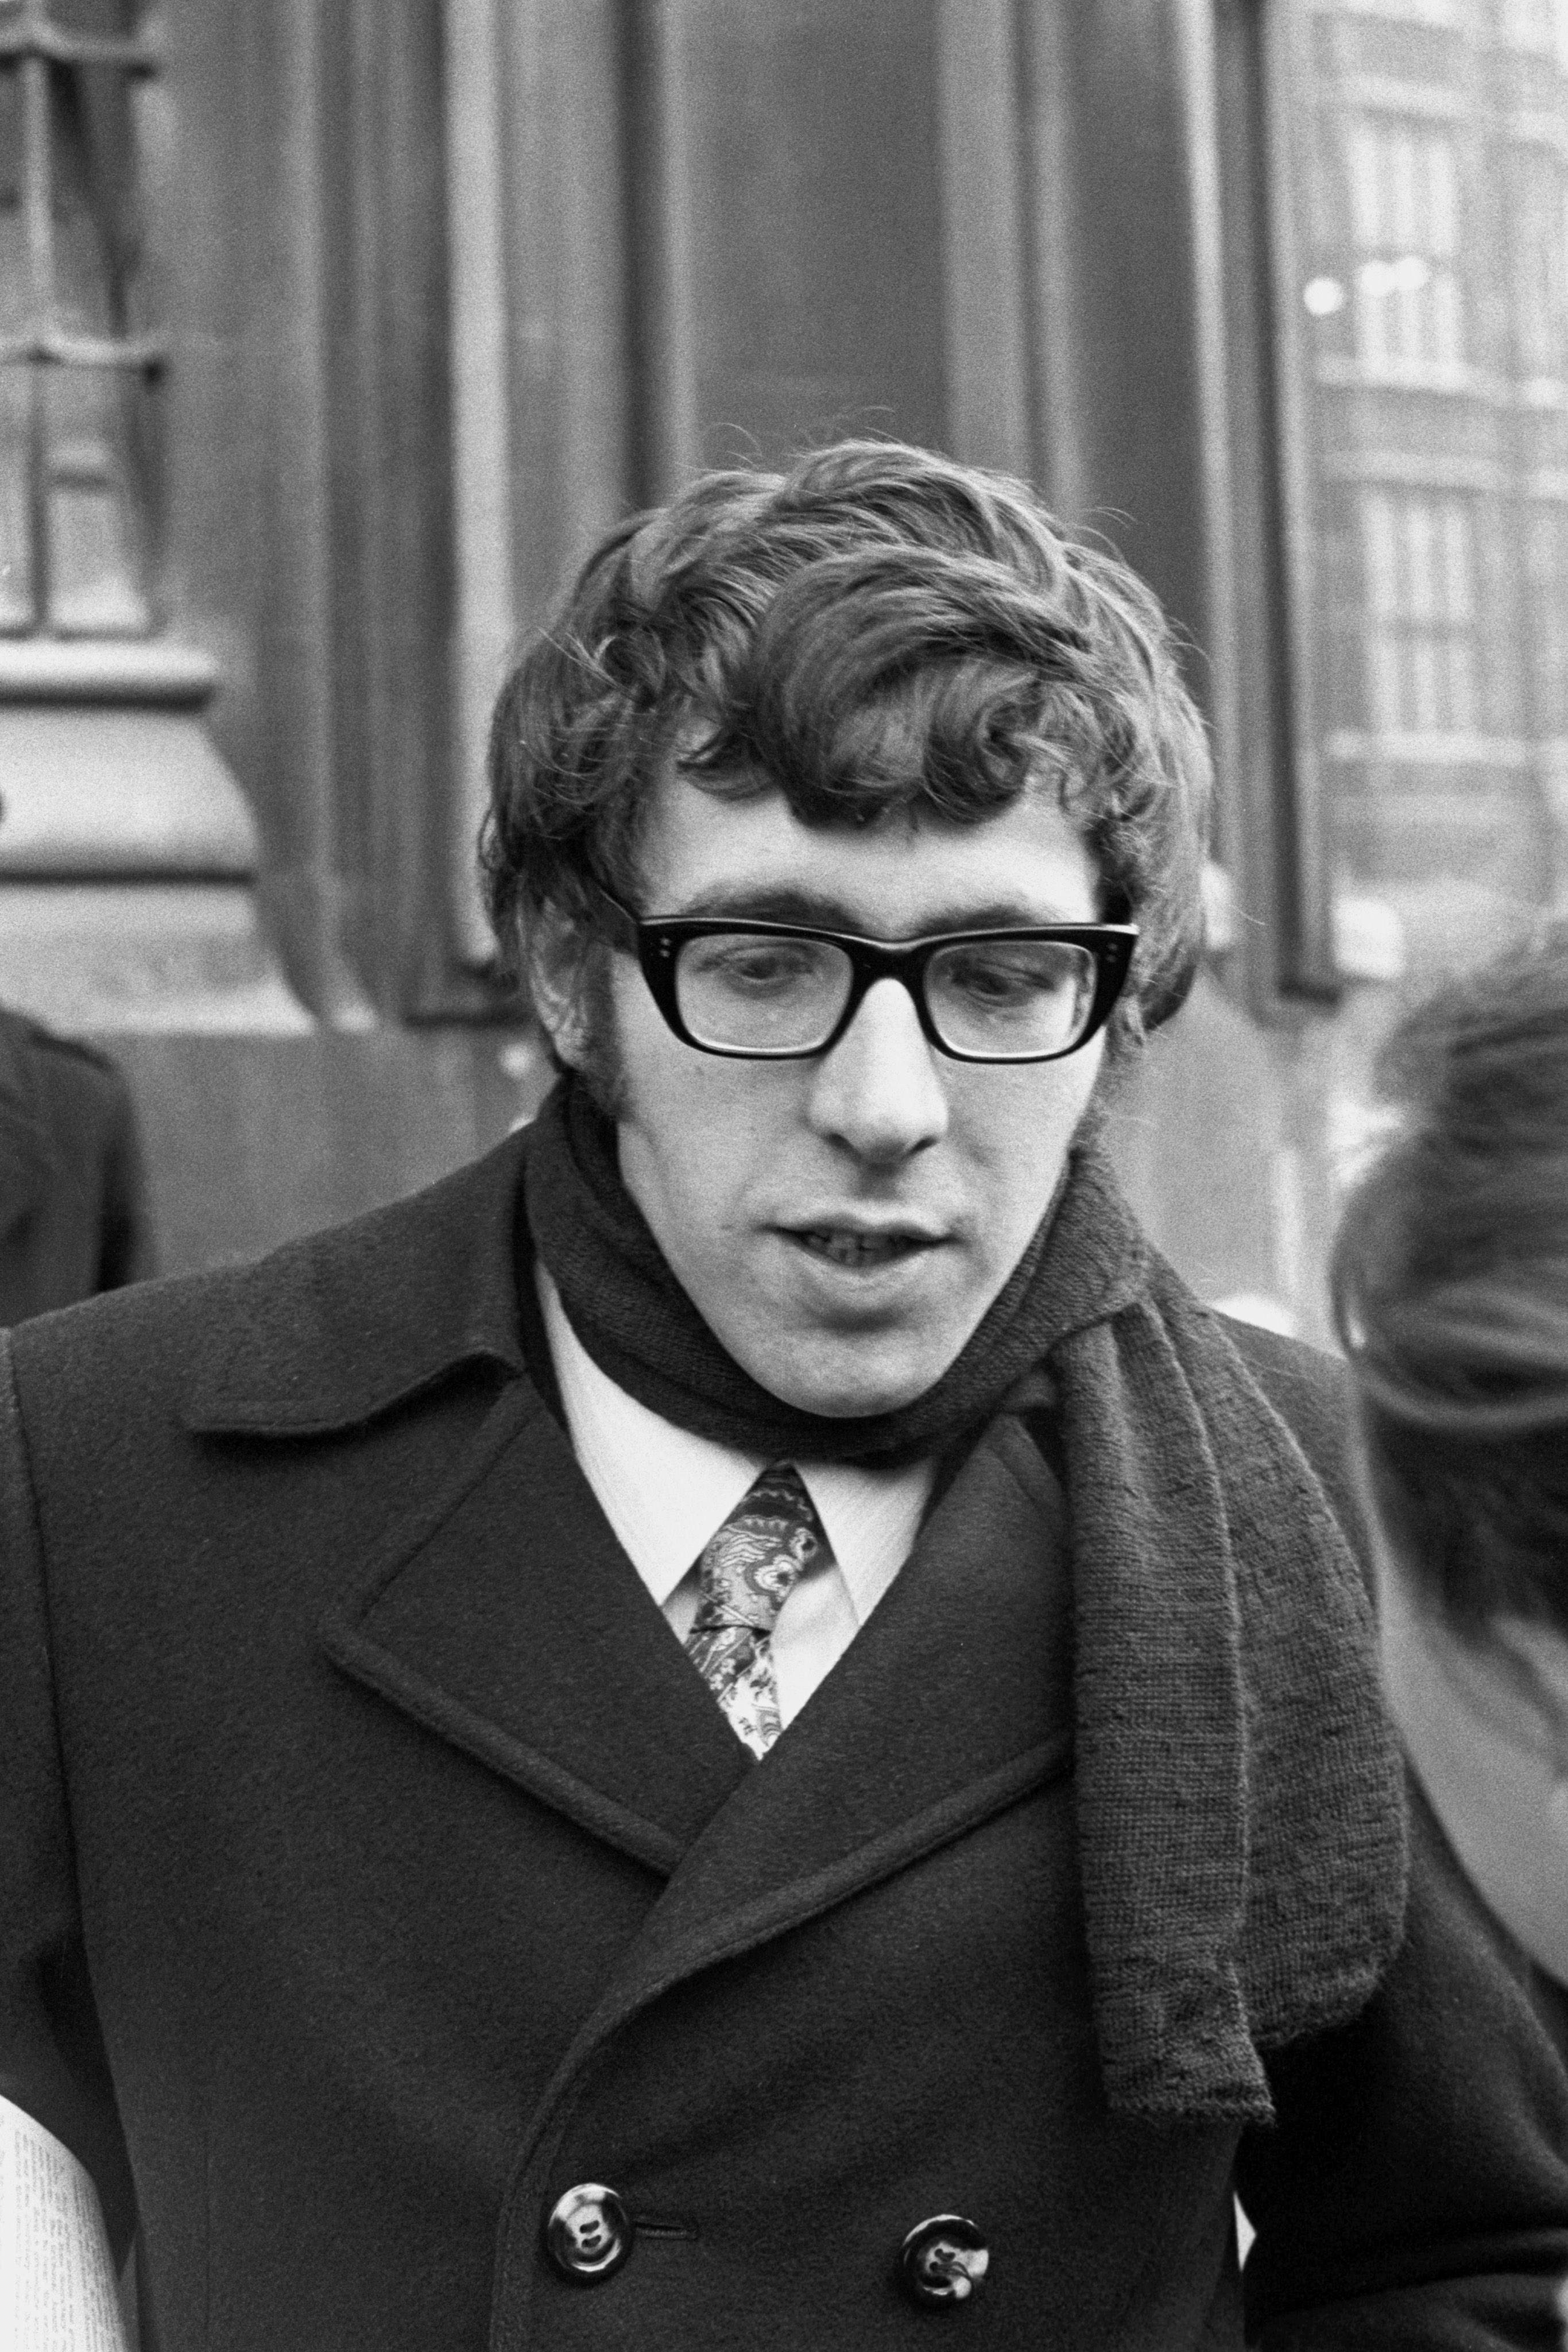 Jack Straw when president of the National Union of Students, in 1971.